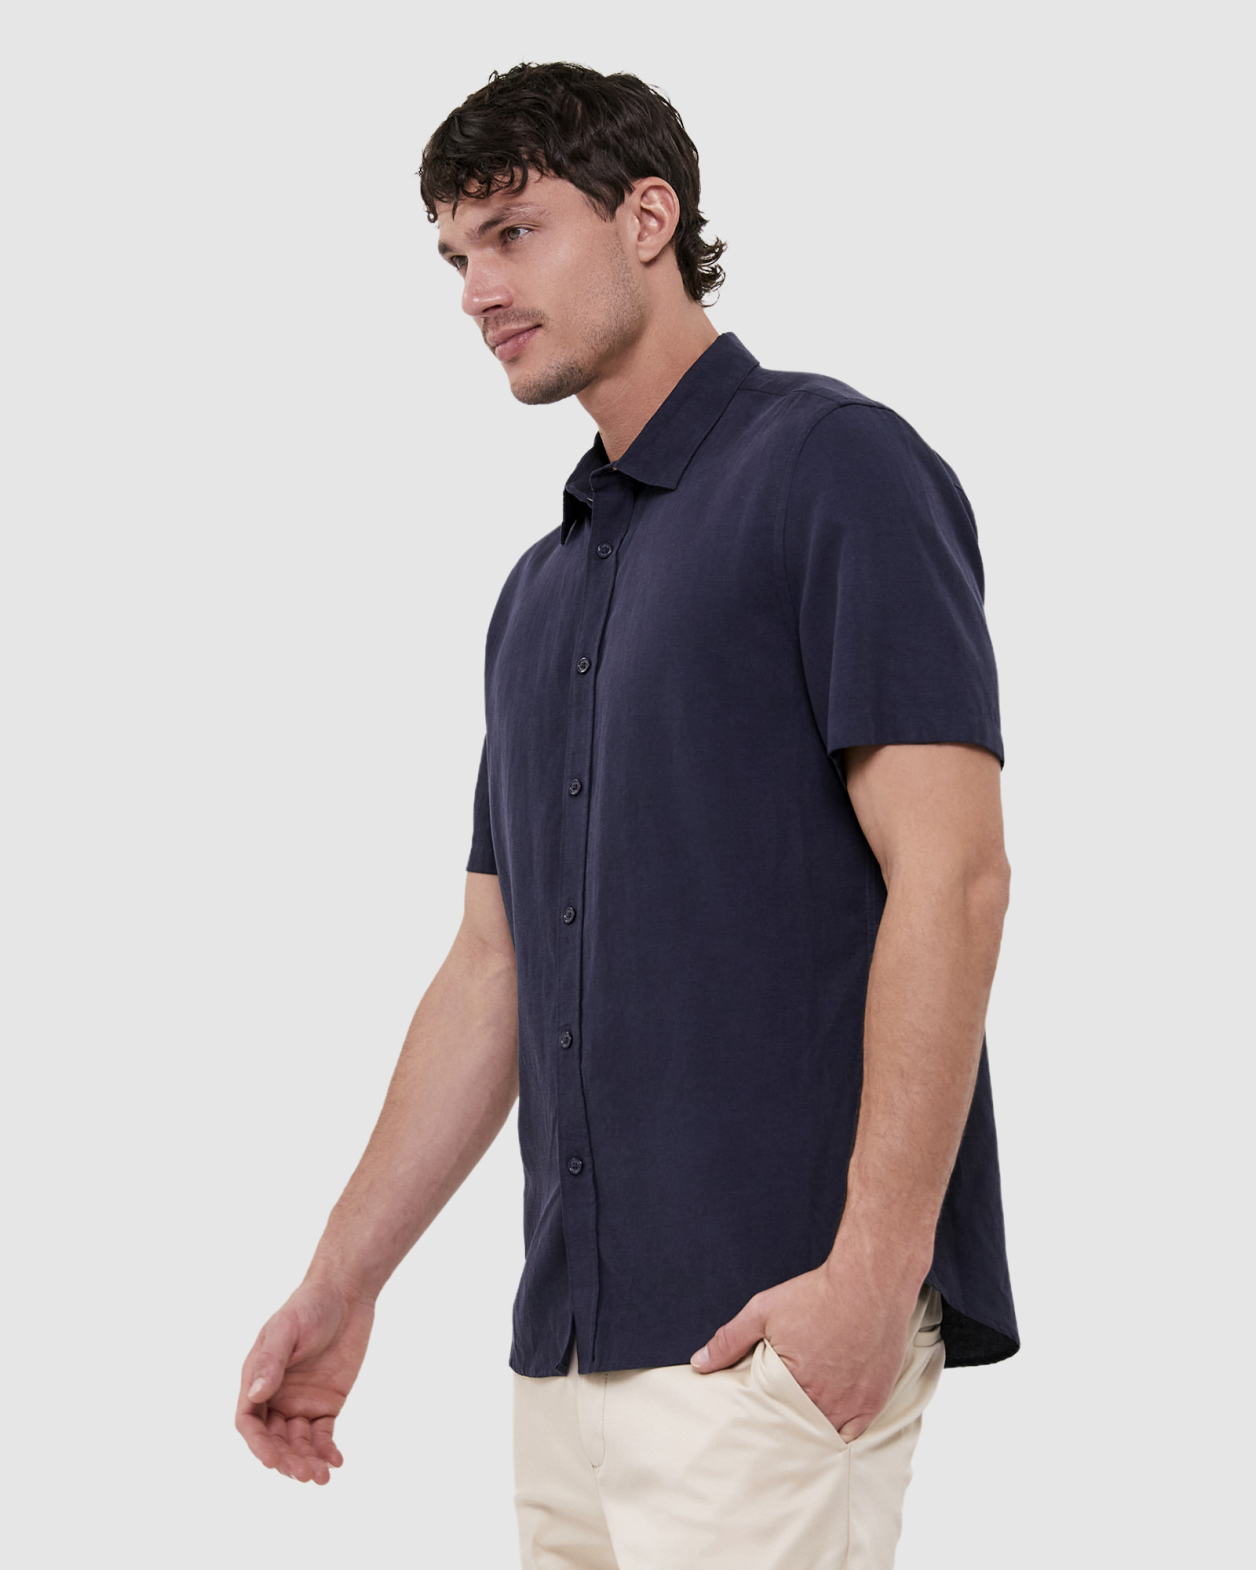 Sterne Short Sleeve Classic Shirt in INK